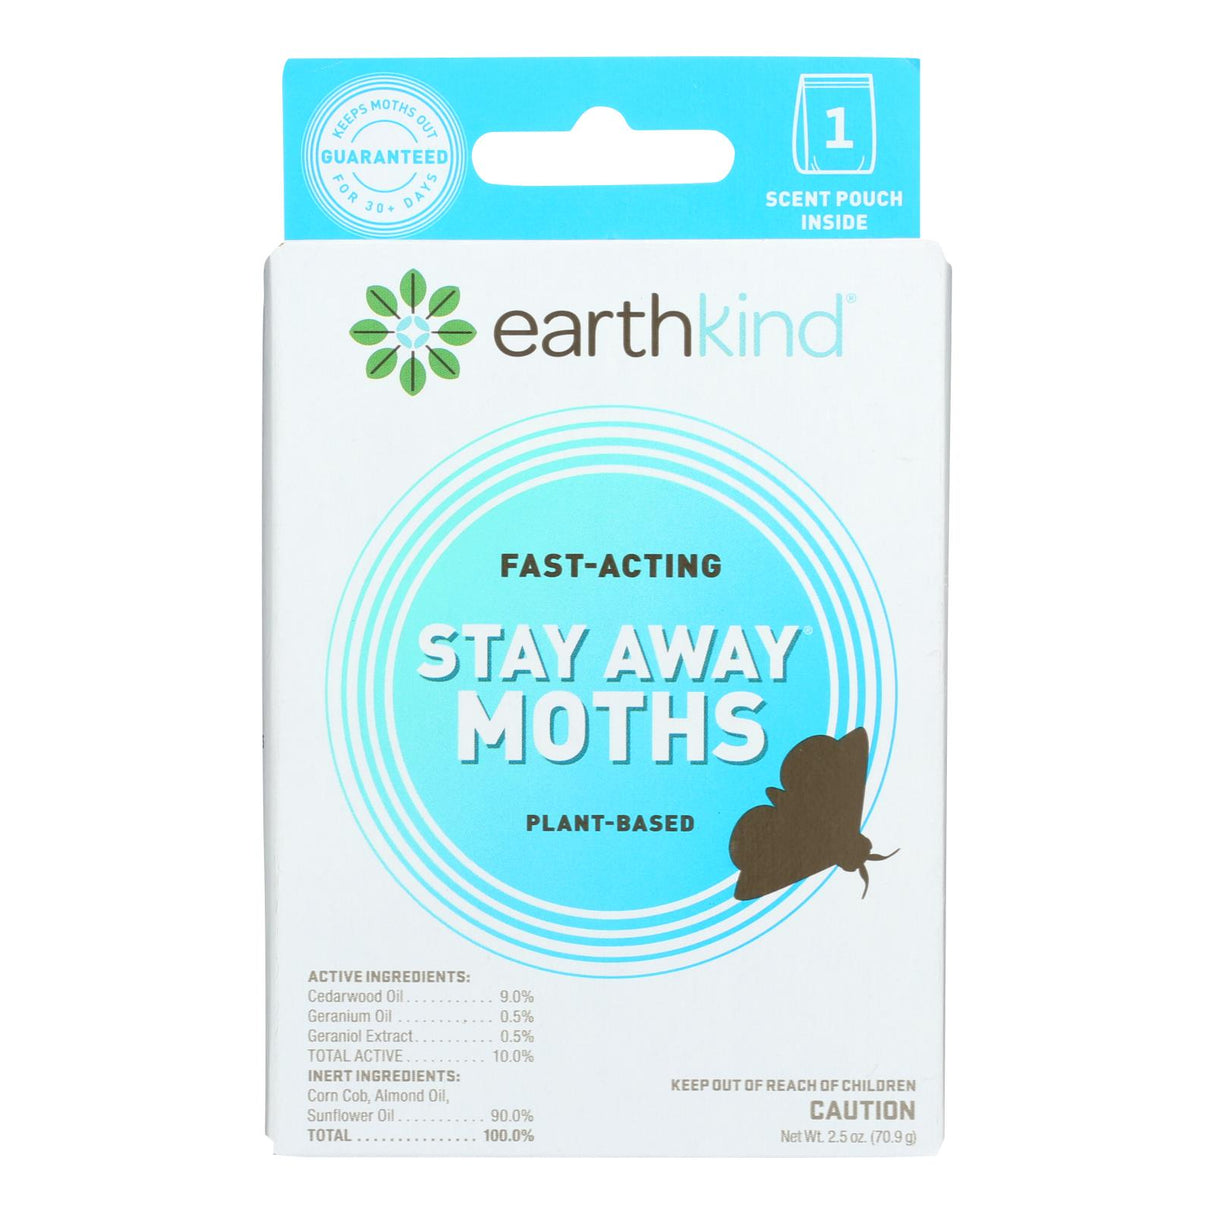 Moth-Proofer: Stay Pest-Free with Odorless Protection (Pack of 8 - 2.5 Oz.) - Cozy Farm 